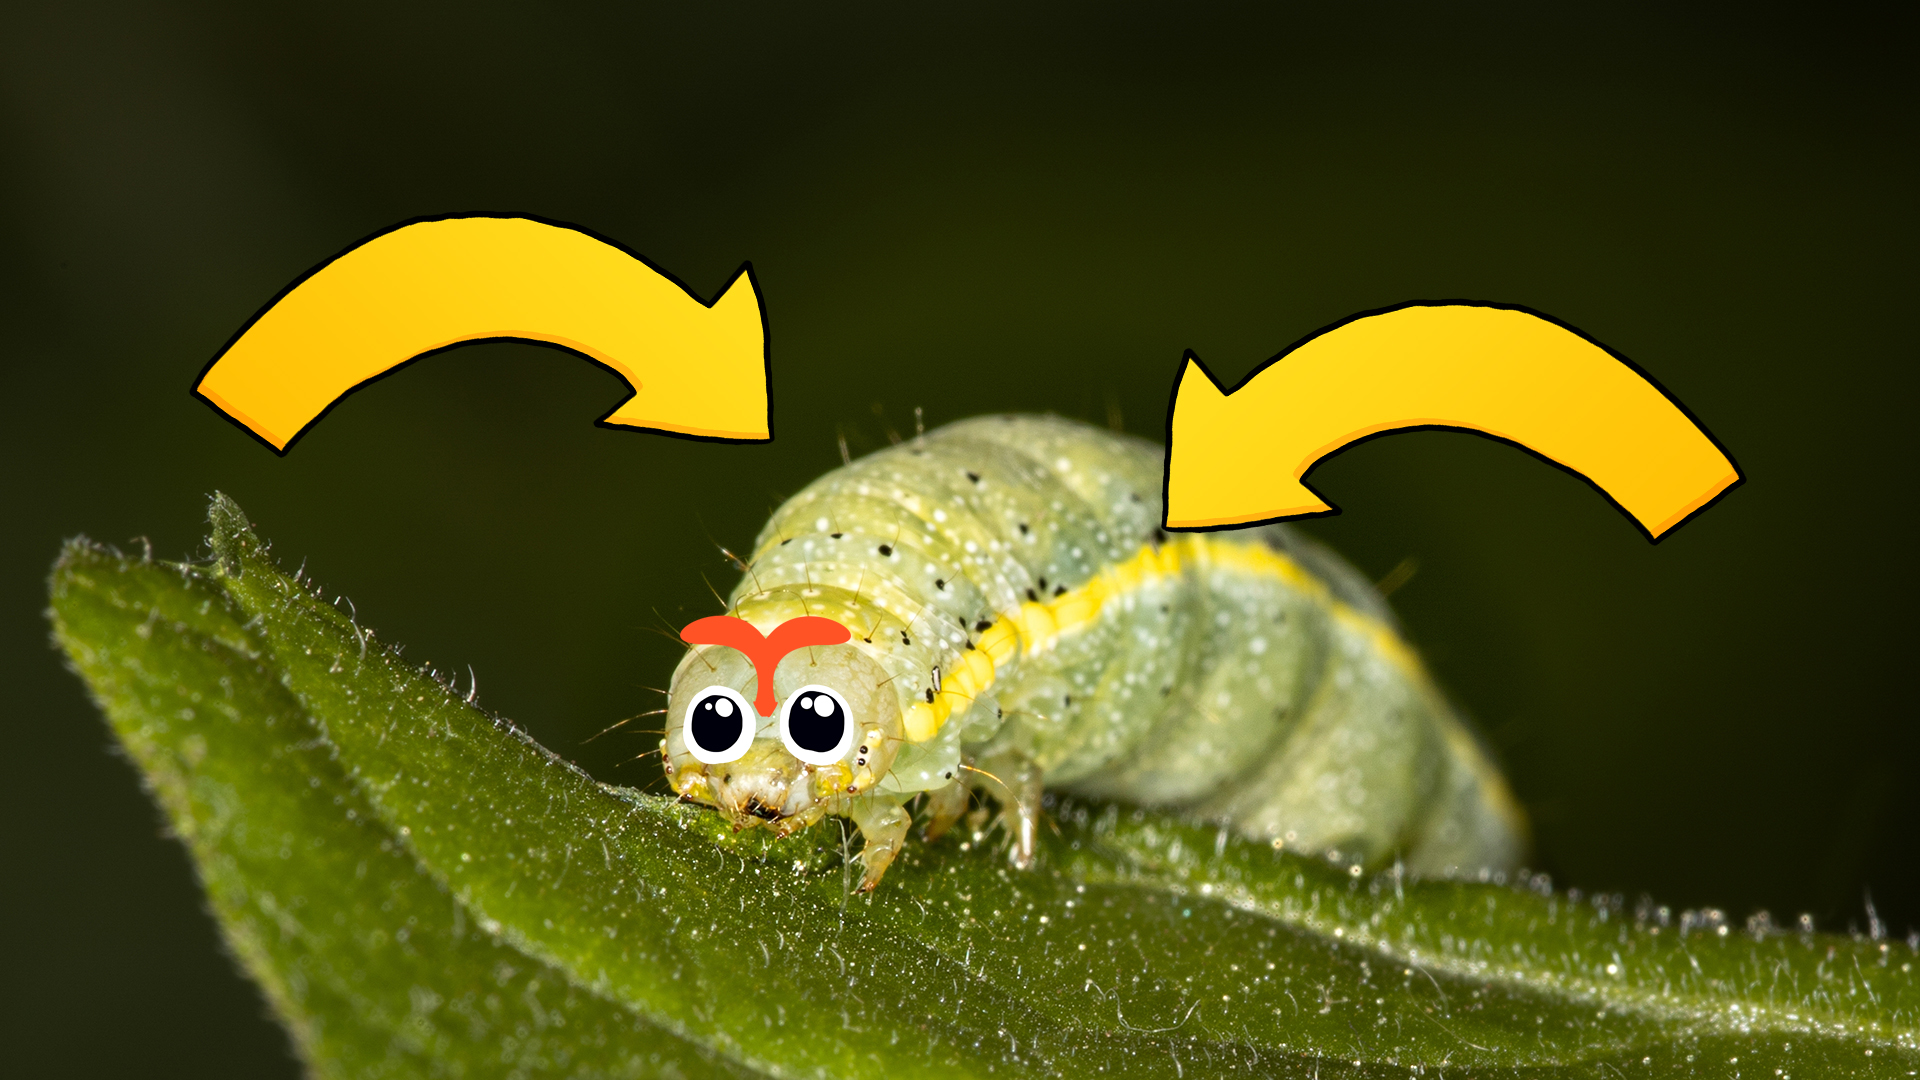 A caterpillar with large eyebrows